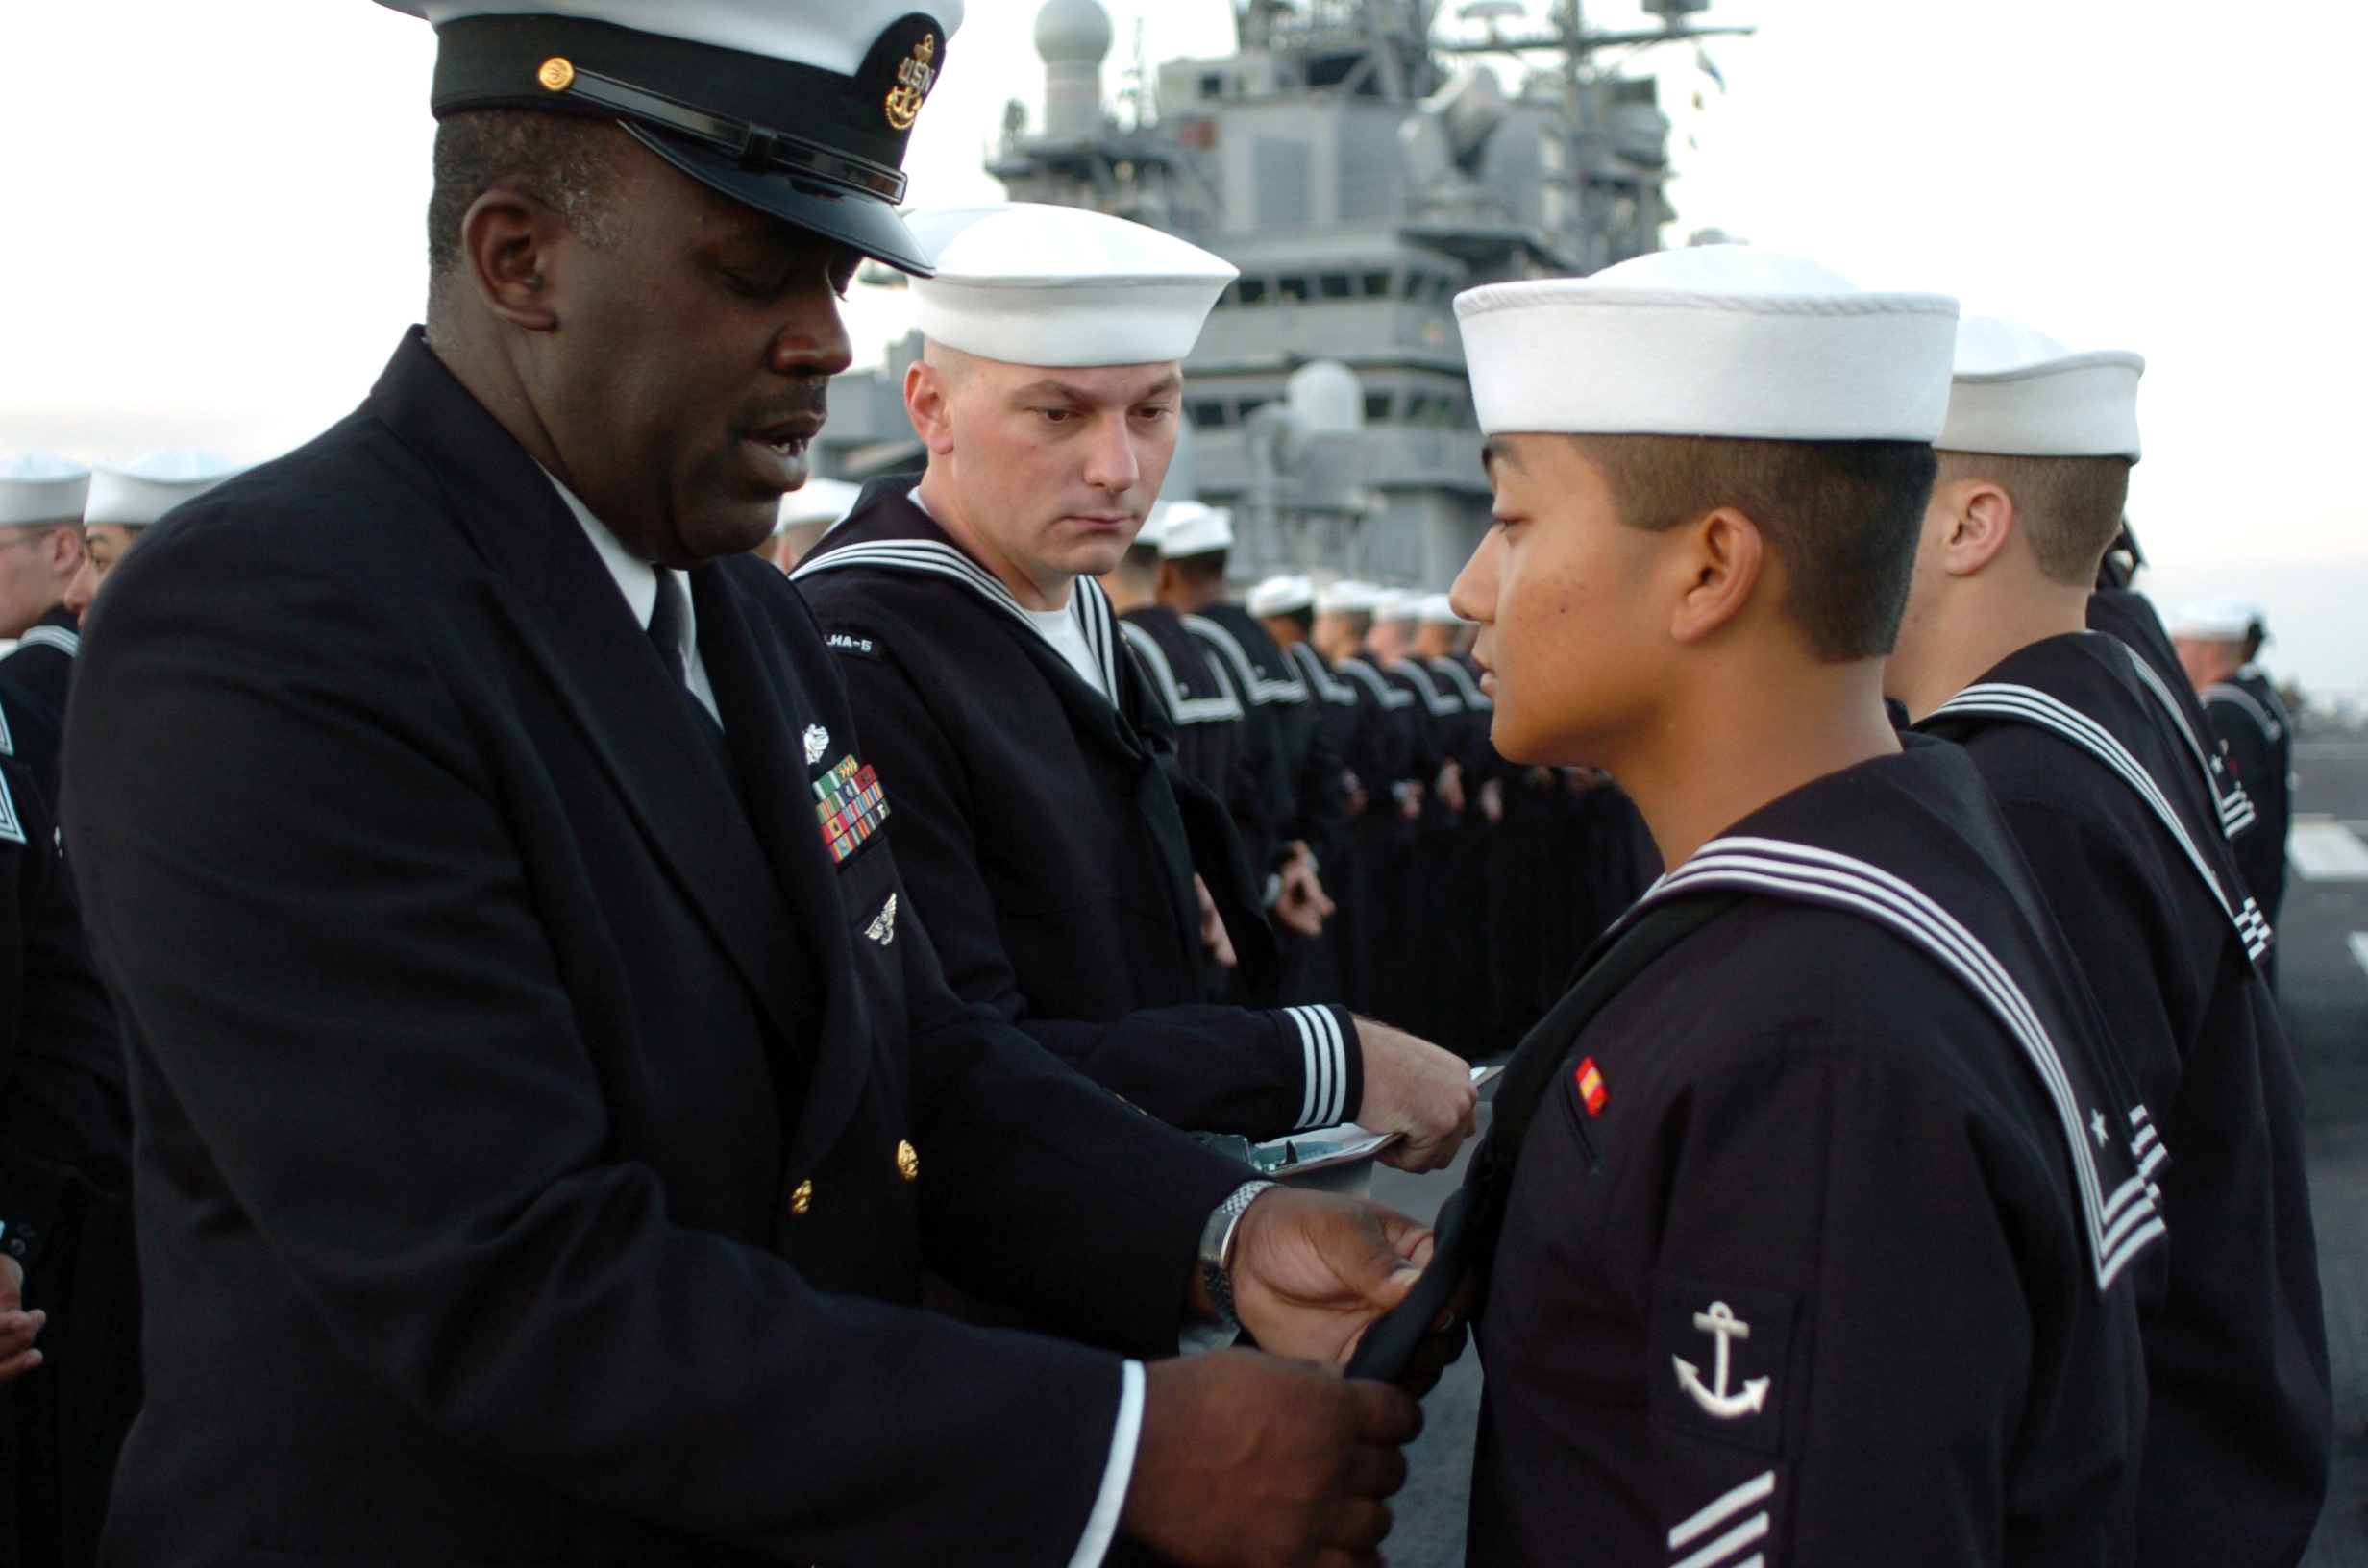 US_Navy_051003-N-9866B-004_Chief_Boatswain%27s_Mate_Keith_Oliver%2C_left%2C_evaluates_his_Sailors_during_a_Service_Dress_Blues_uniform_inspection.jpg